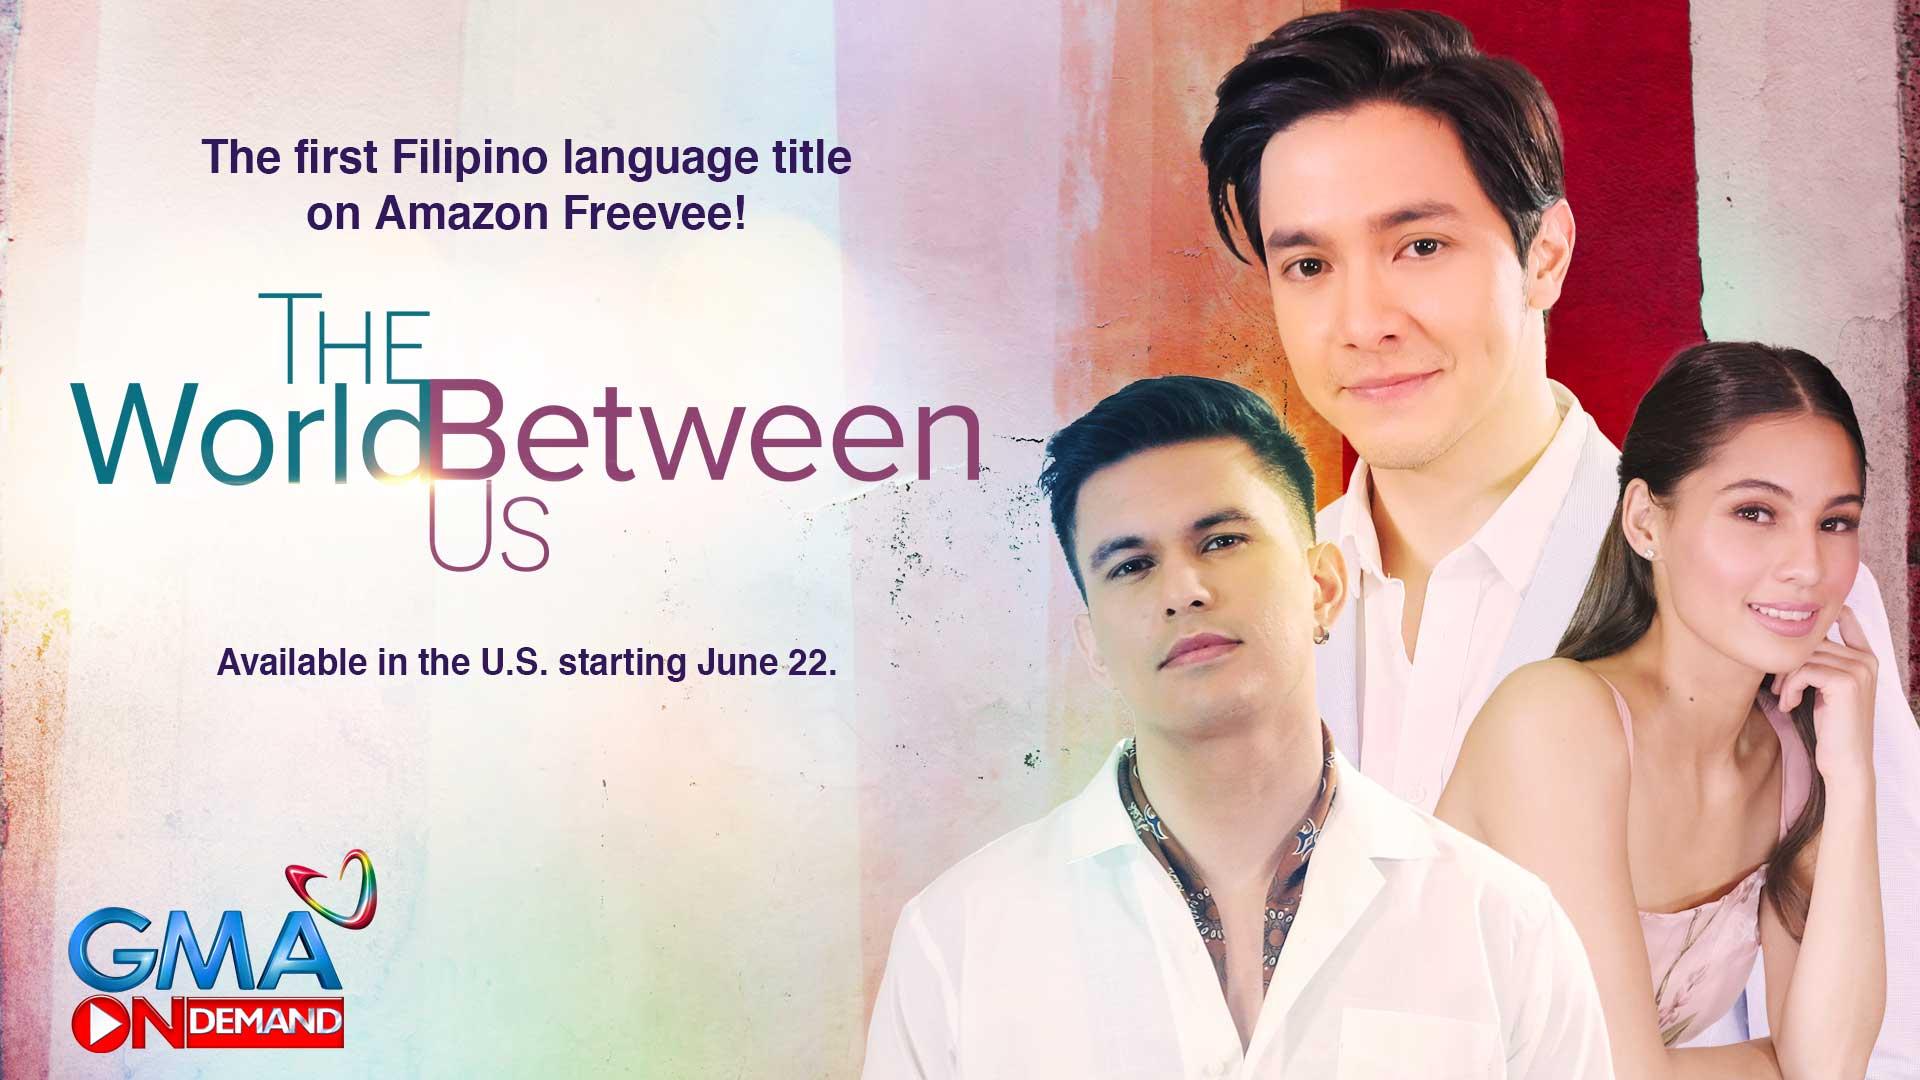 GMAs The World Between Us becomes the first Filipino language title on Amazon Freevee GMA News Online